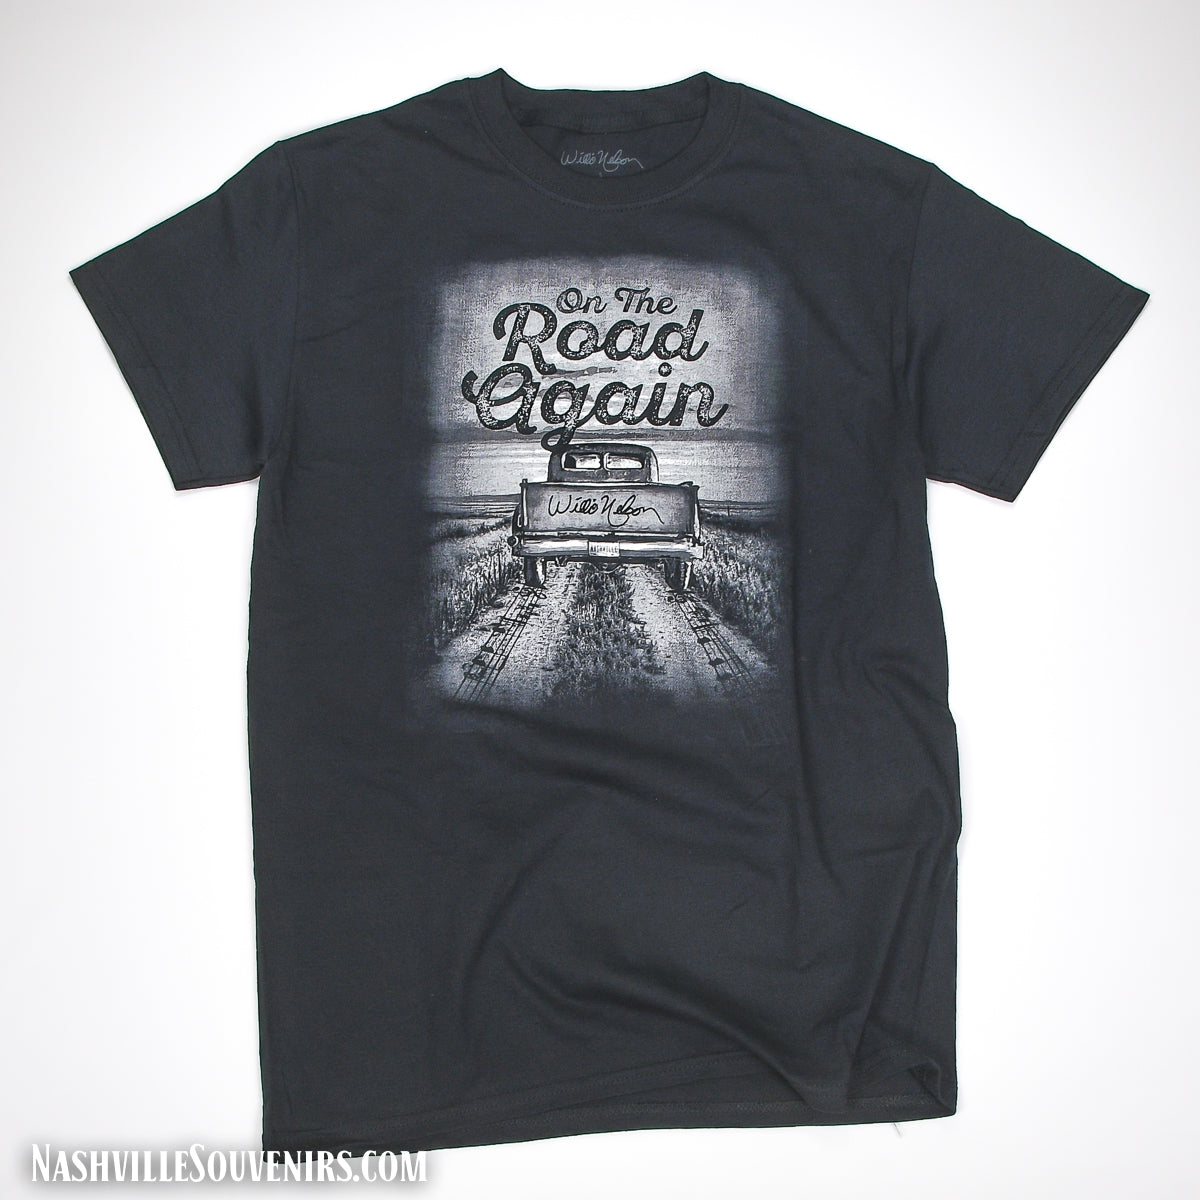 "On the Road Again" Willie Nelson Tee